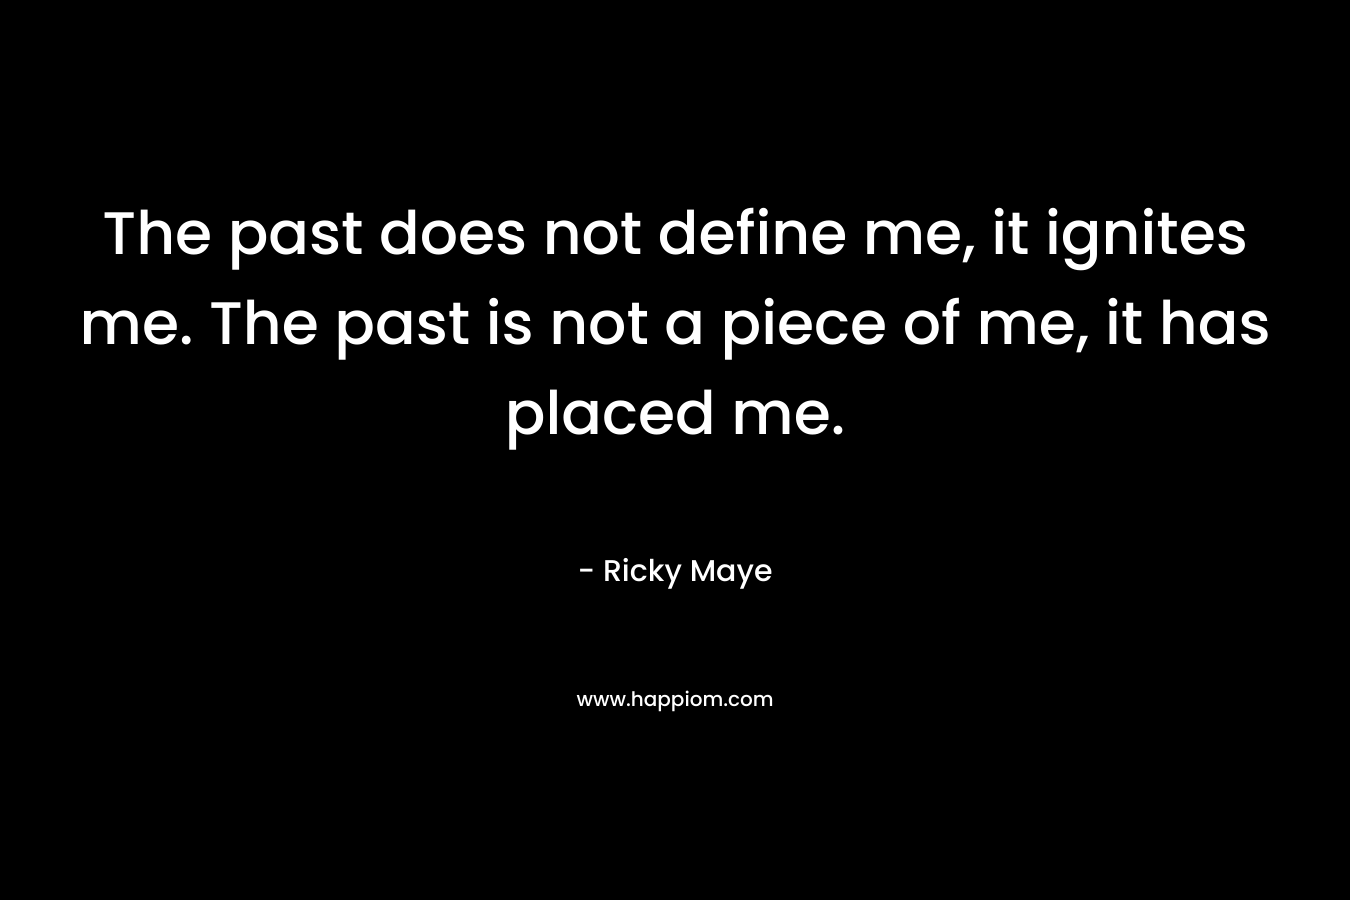 The past does not define me, it ignites me. The past is not a piece of me, it has placed me. – Ricky Maye